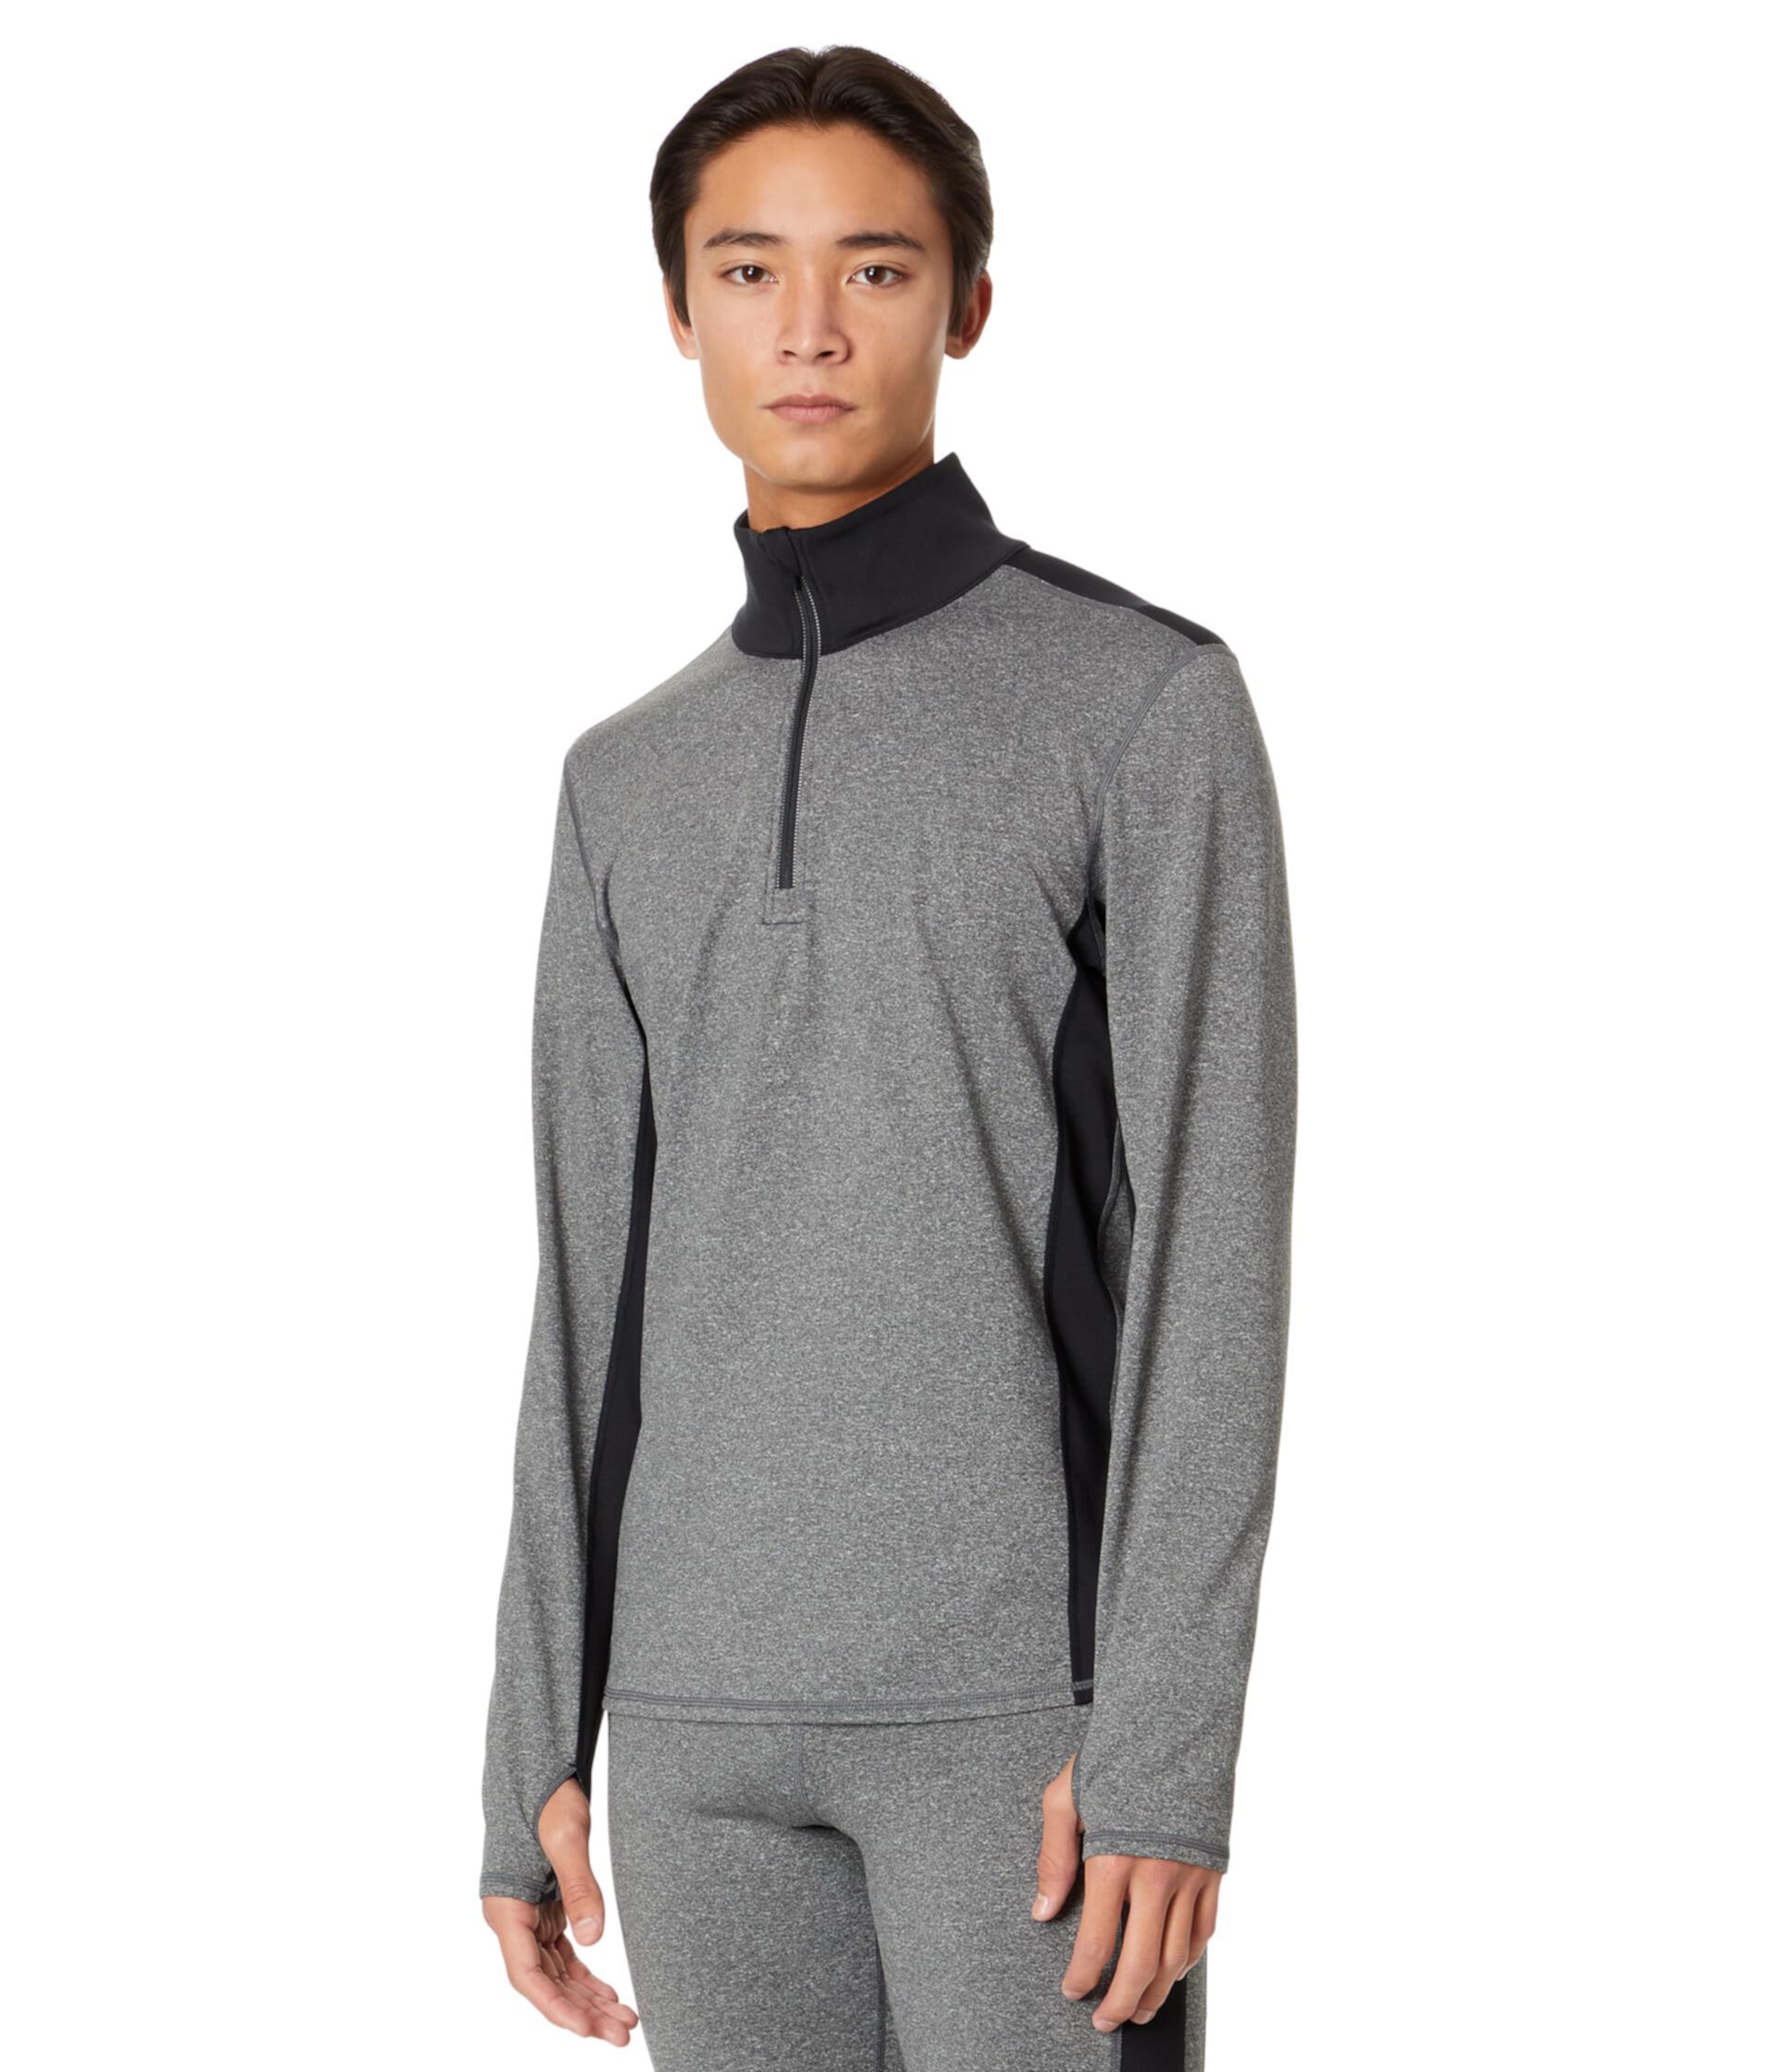 Micro Elite Chamois Color Block Zip-T Hot Chilly's